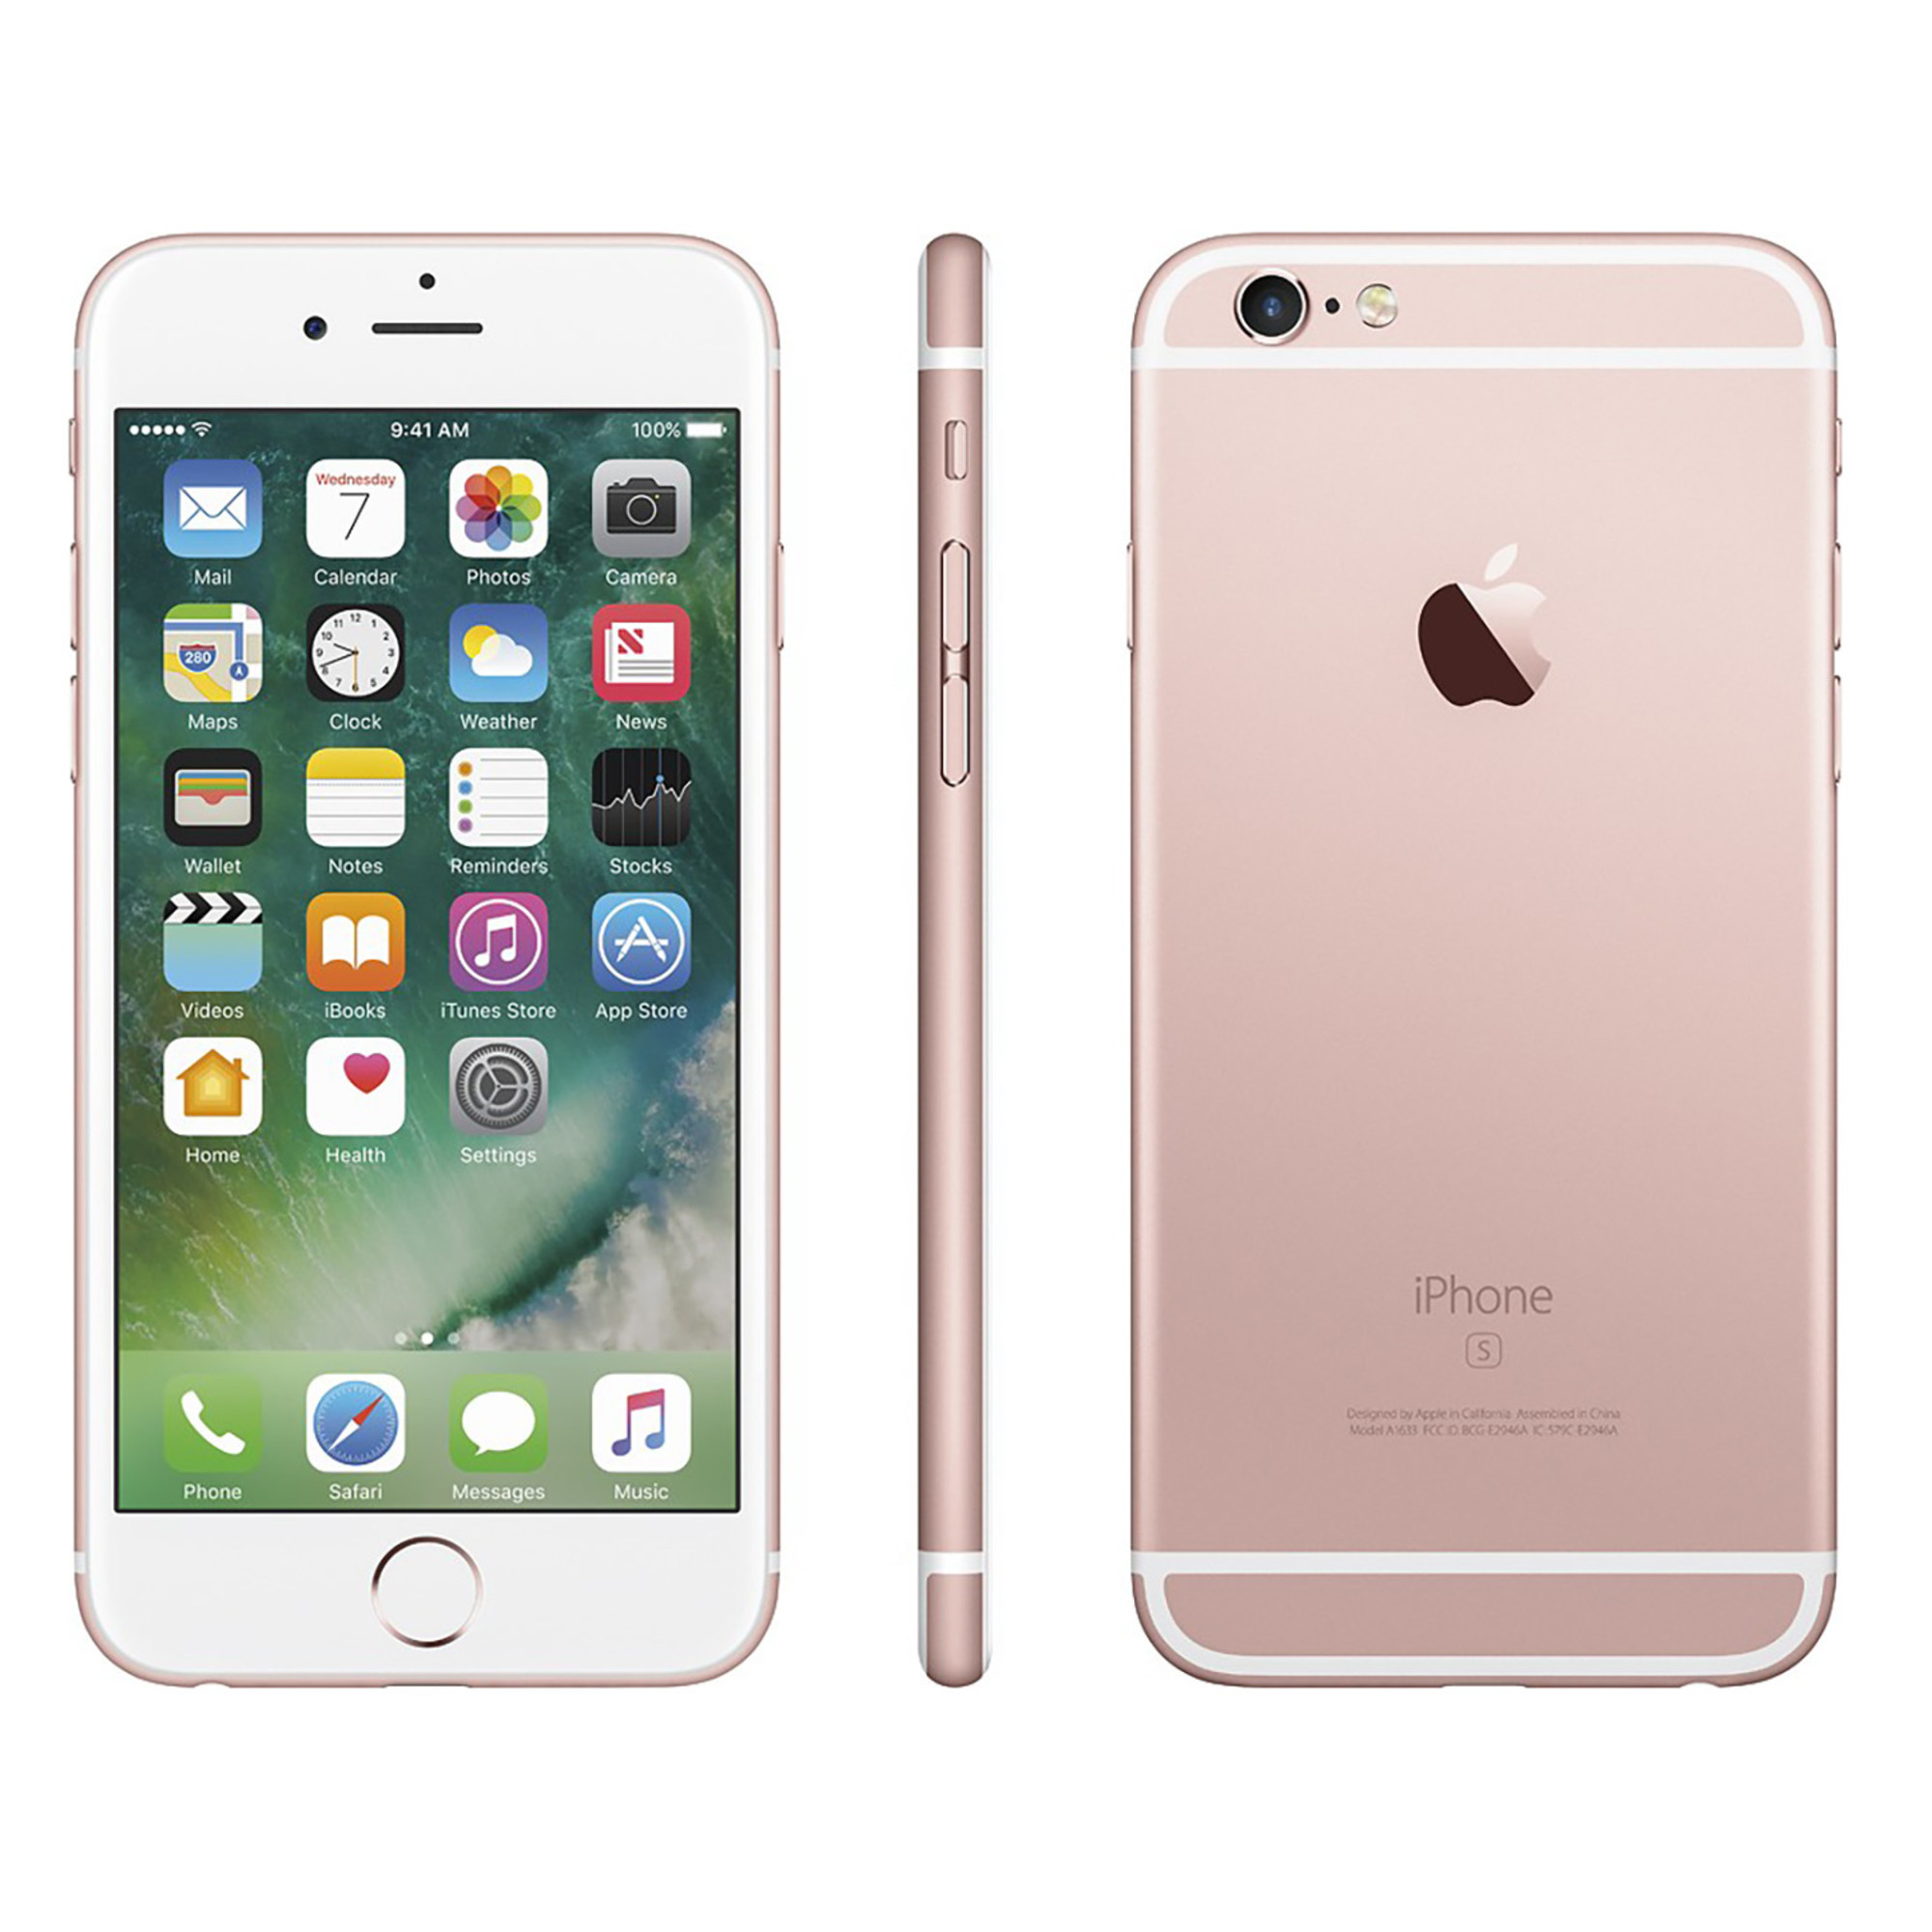 Apple iPhone 6s 32GB GSM Phone - Rose Gold (Used) + WeCare Alcohol Wipes Pack (50 Wipes) - image 4 of 6